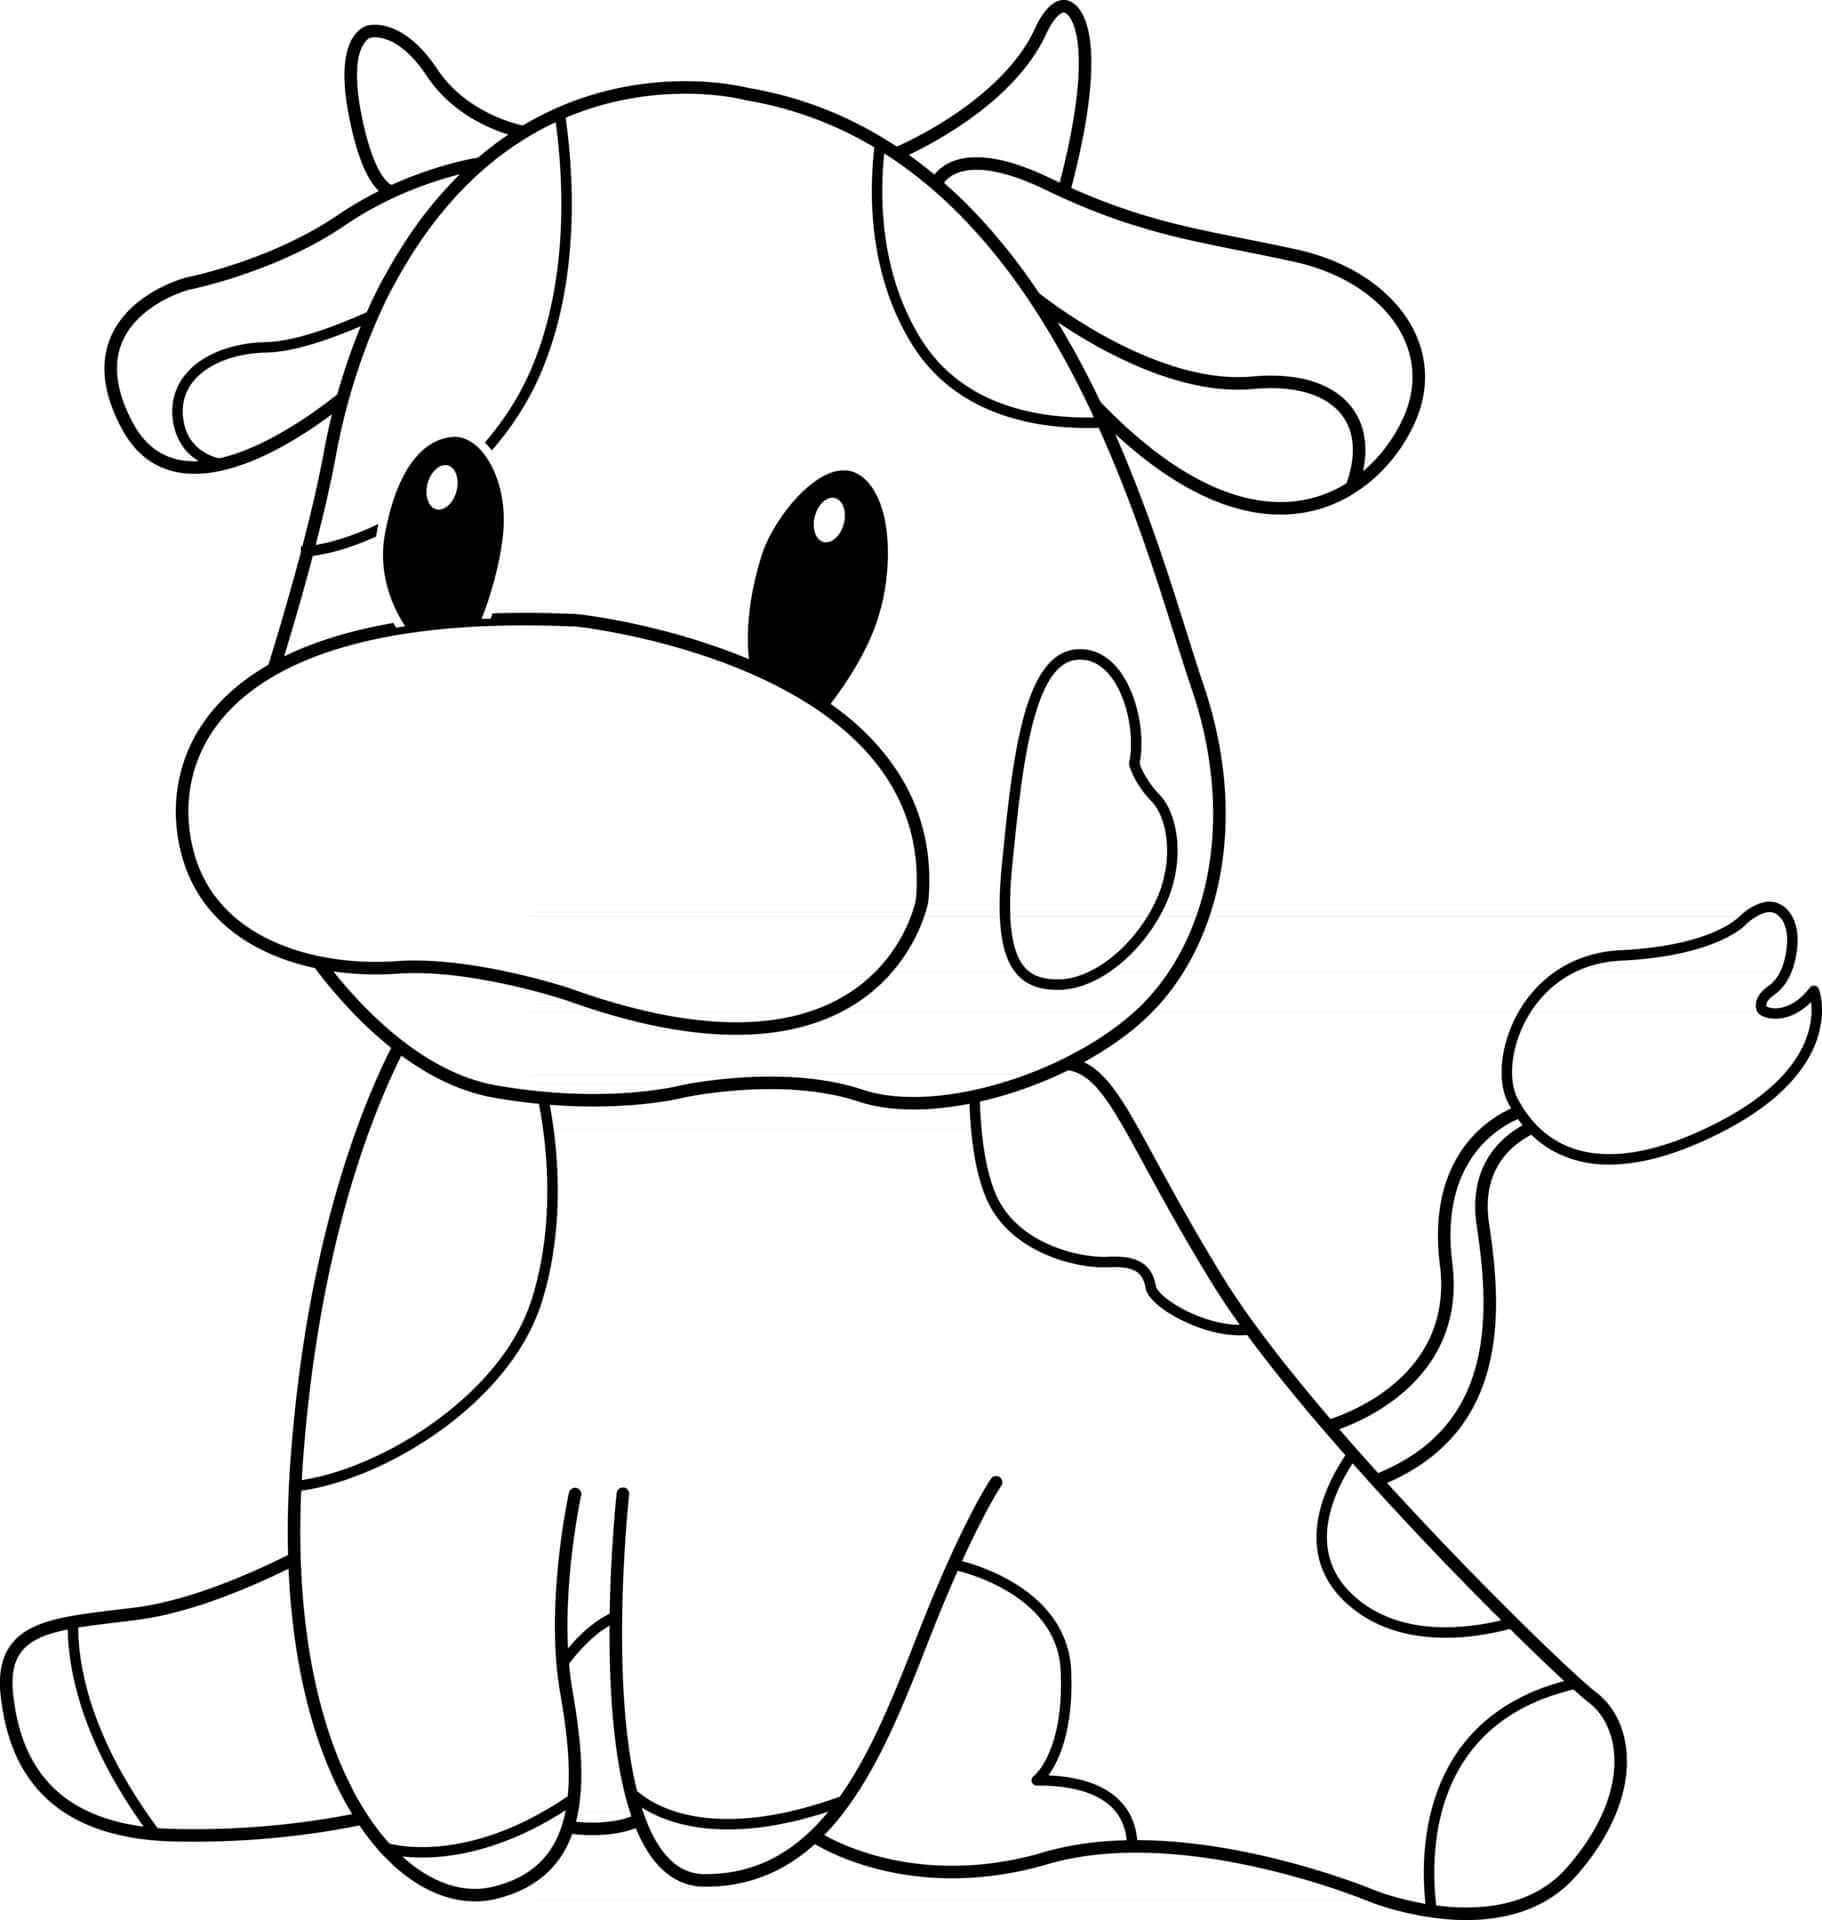 Cow Cute Animal Coloring Pages   Coloring Cool